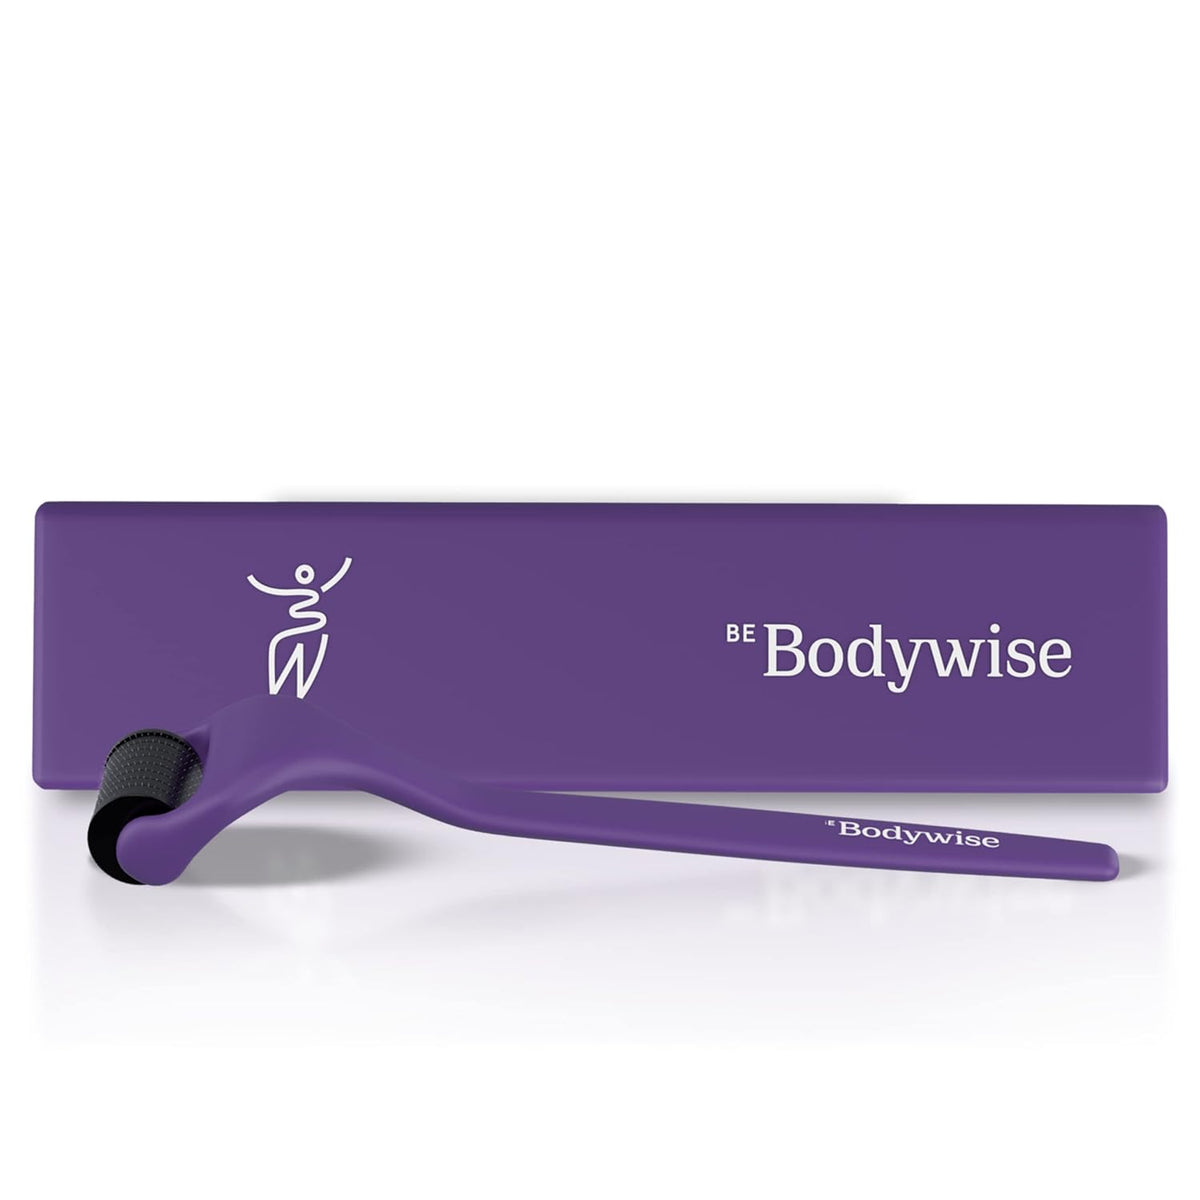 Bodywise Advance Derma Roller for Women | 540 Micro 0.5mm Titanium Alloy Needles | Faster Absorption of Oils & Serums | Reduces Hair Fall & Stimulates Hair Follicles | Safe, Easy & Effective To Use